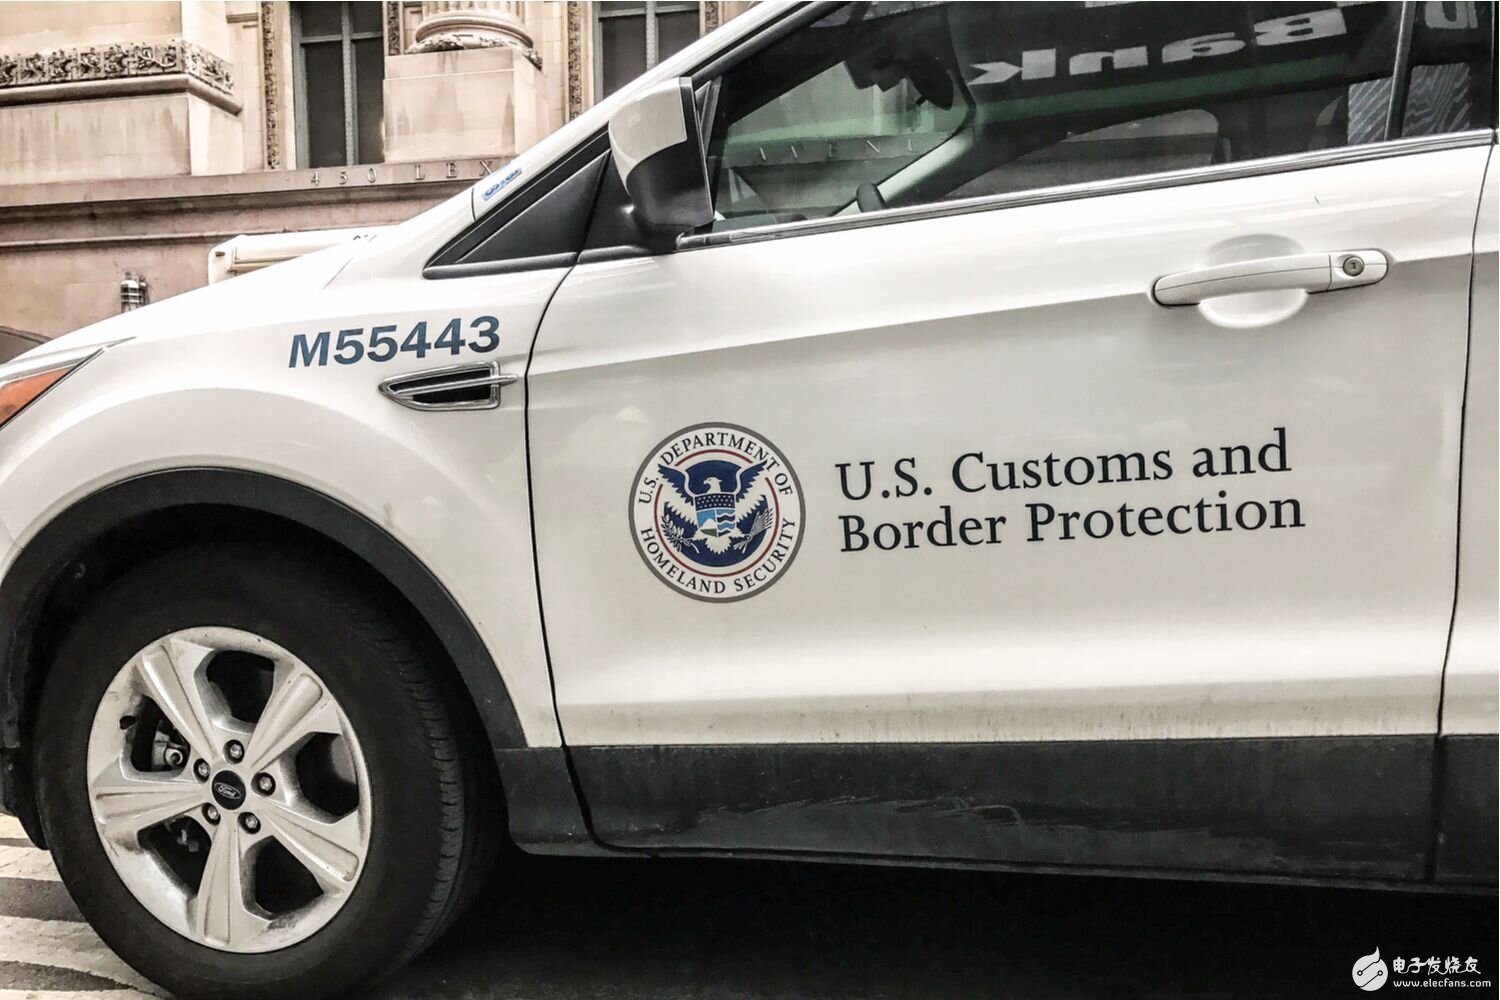 U.S. Customs and Border Protection will use blockchain technology to verify trade agreement certificates